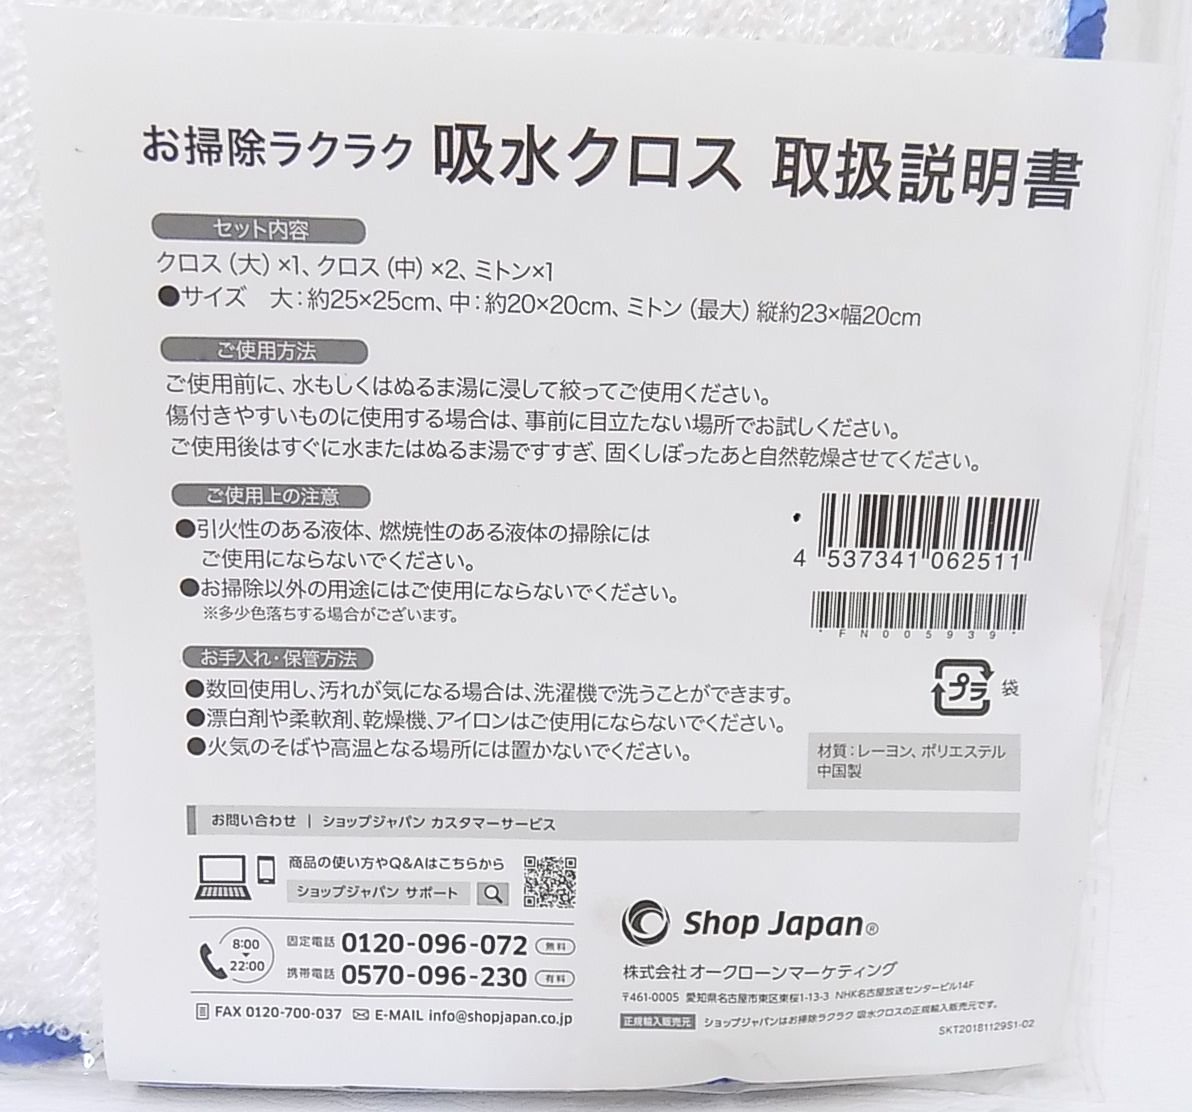 1S965*# shop Japan FOSA four sa rectangle vacuum container ( large )( middle ) set FN006228 FN006229. water Cross attaching #*[ new Poe n]